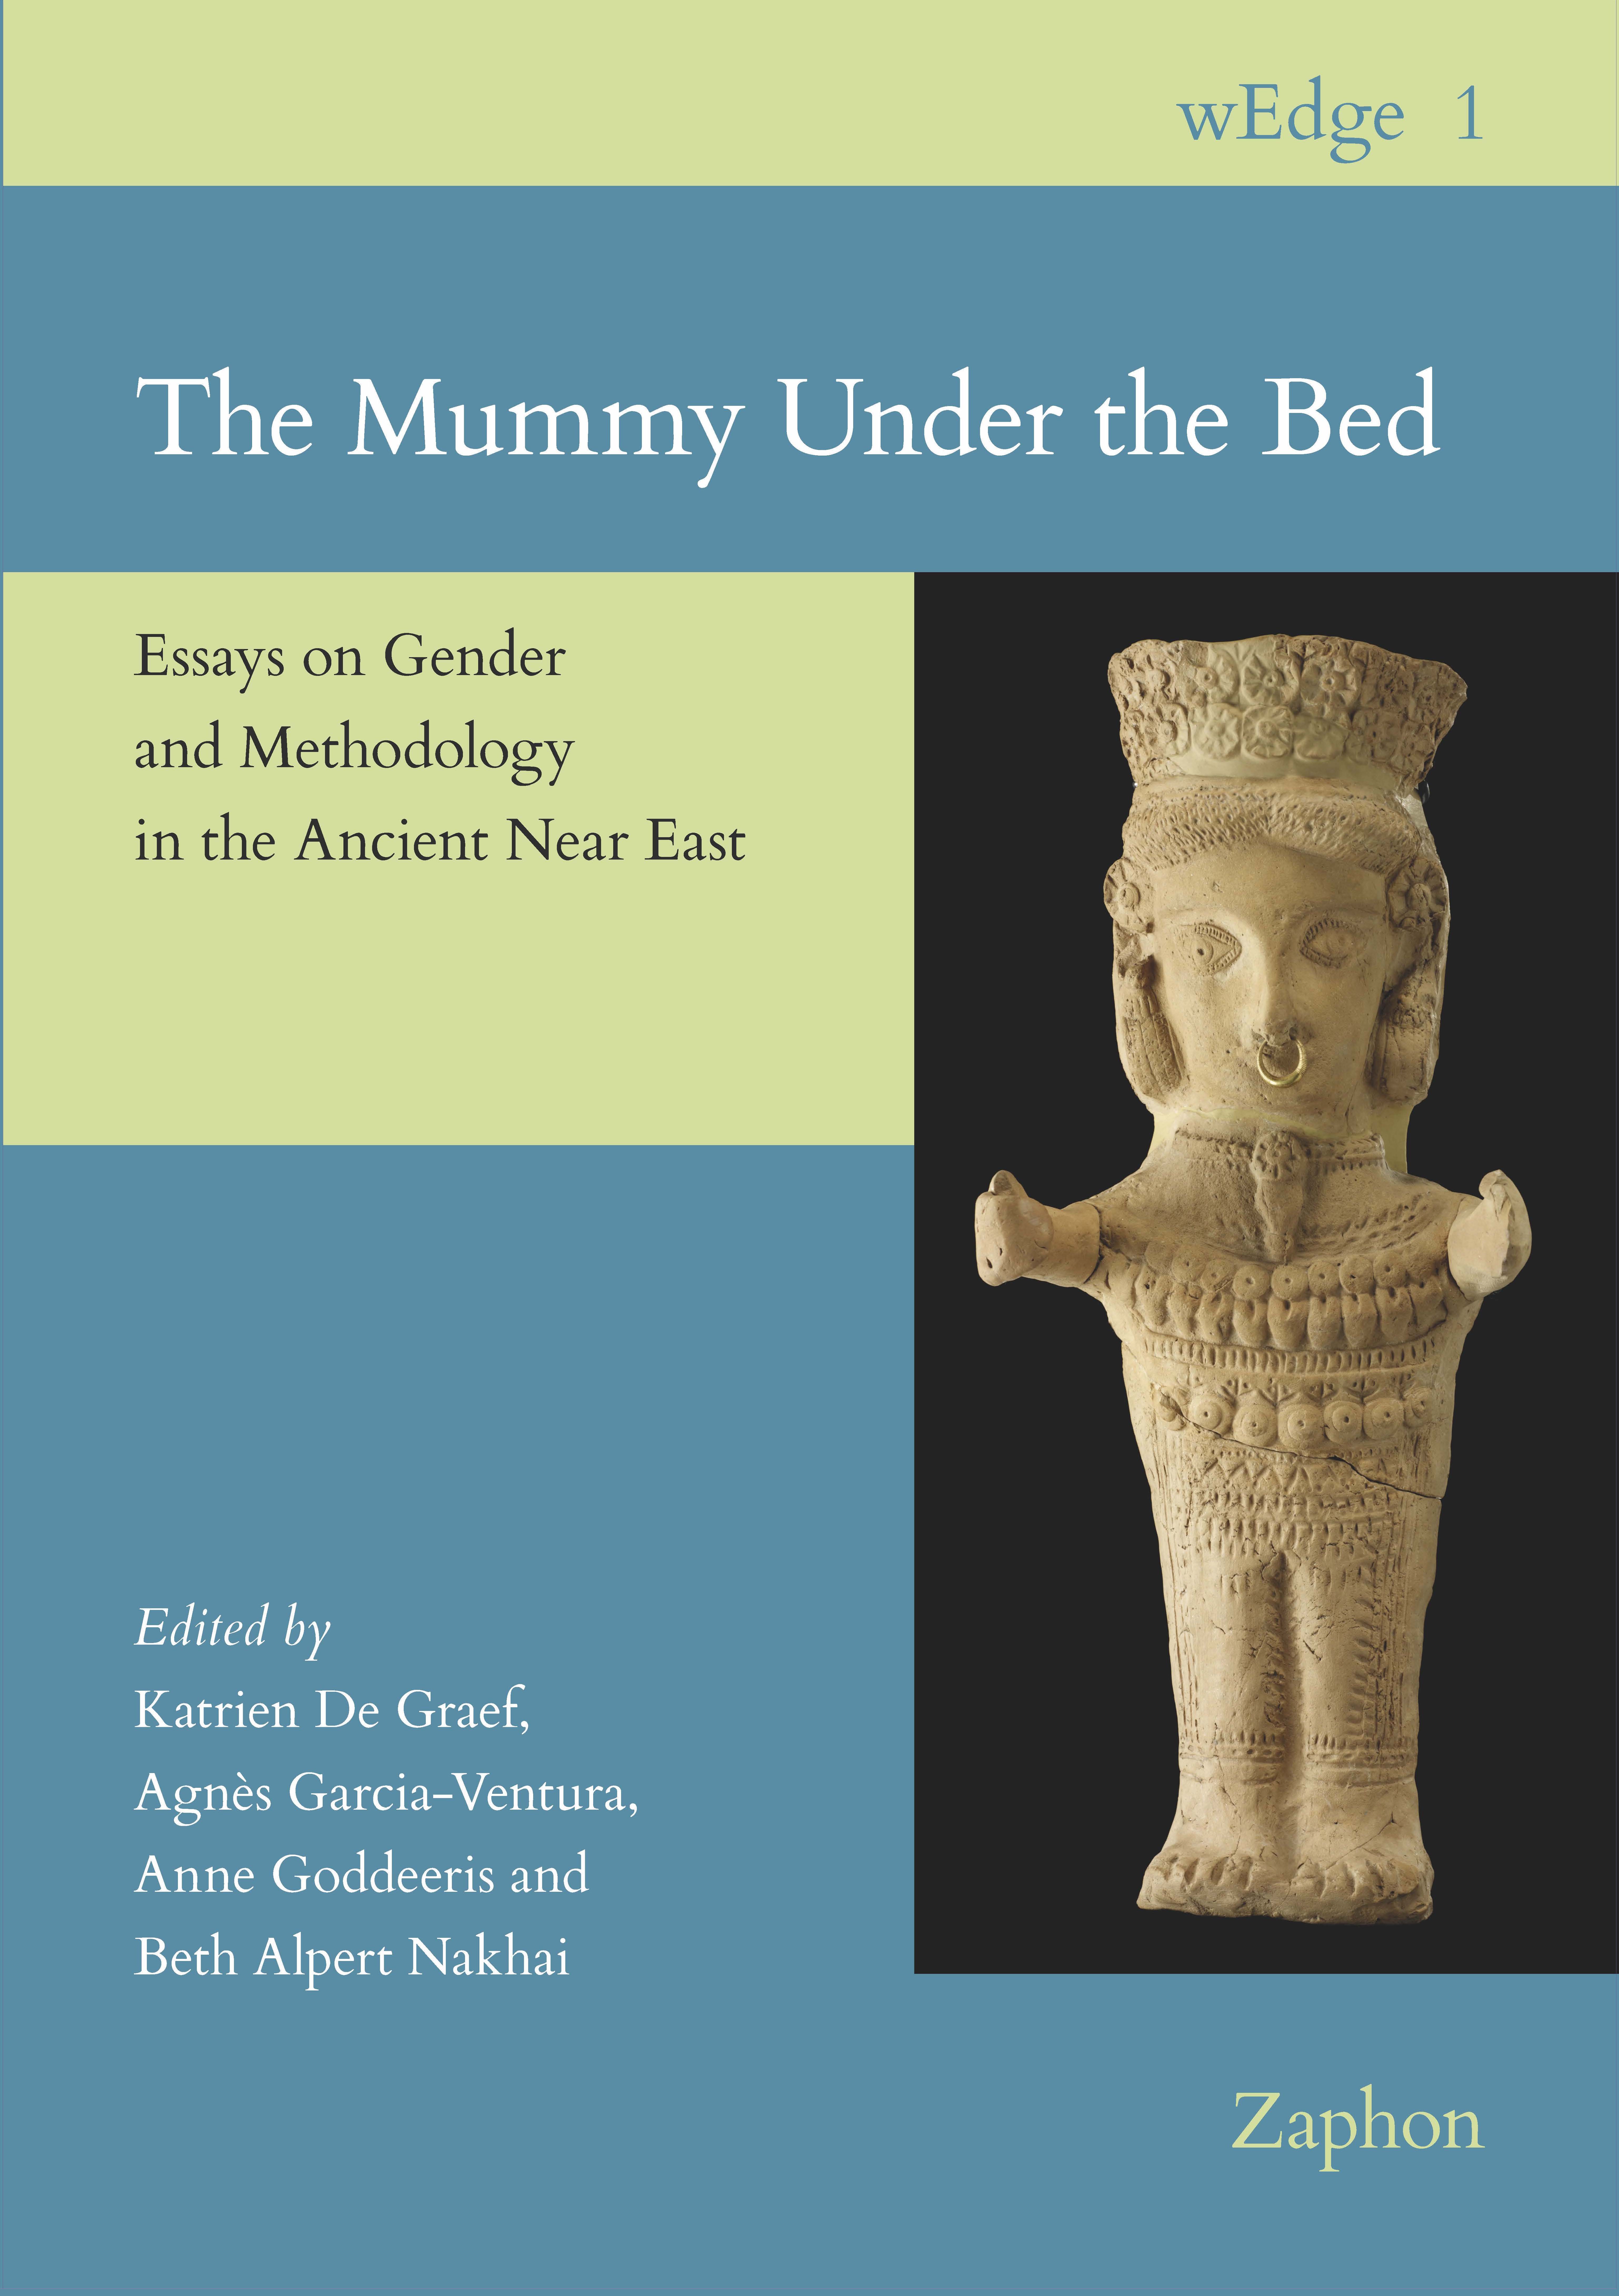 Cover of book: The Mummy Under the Bed